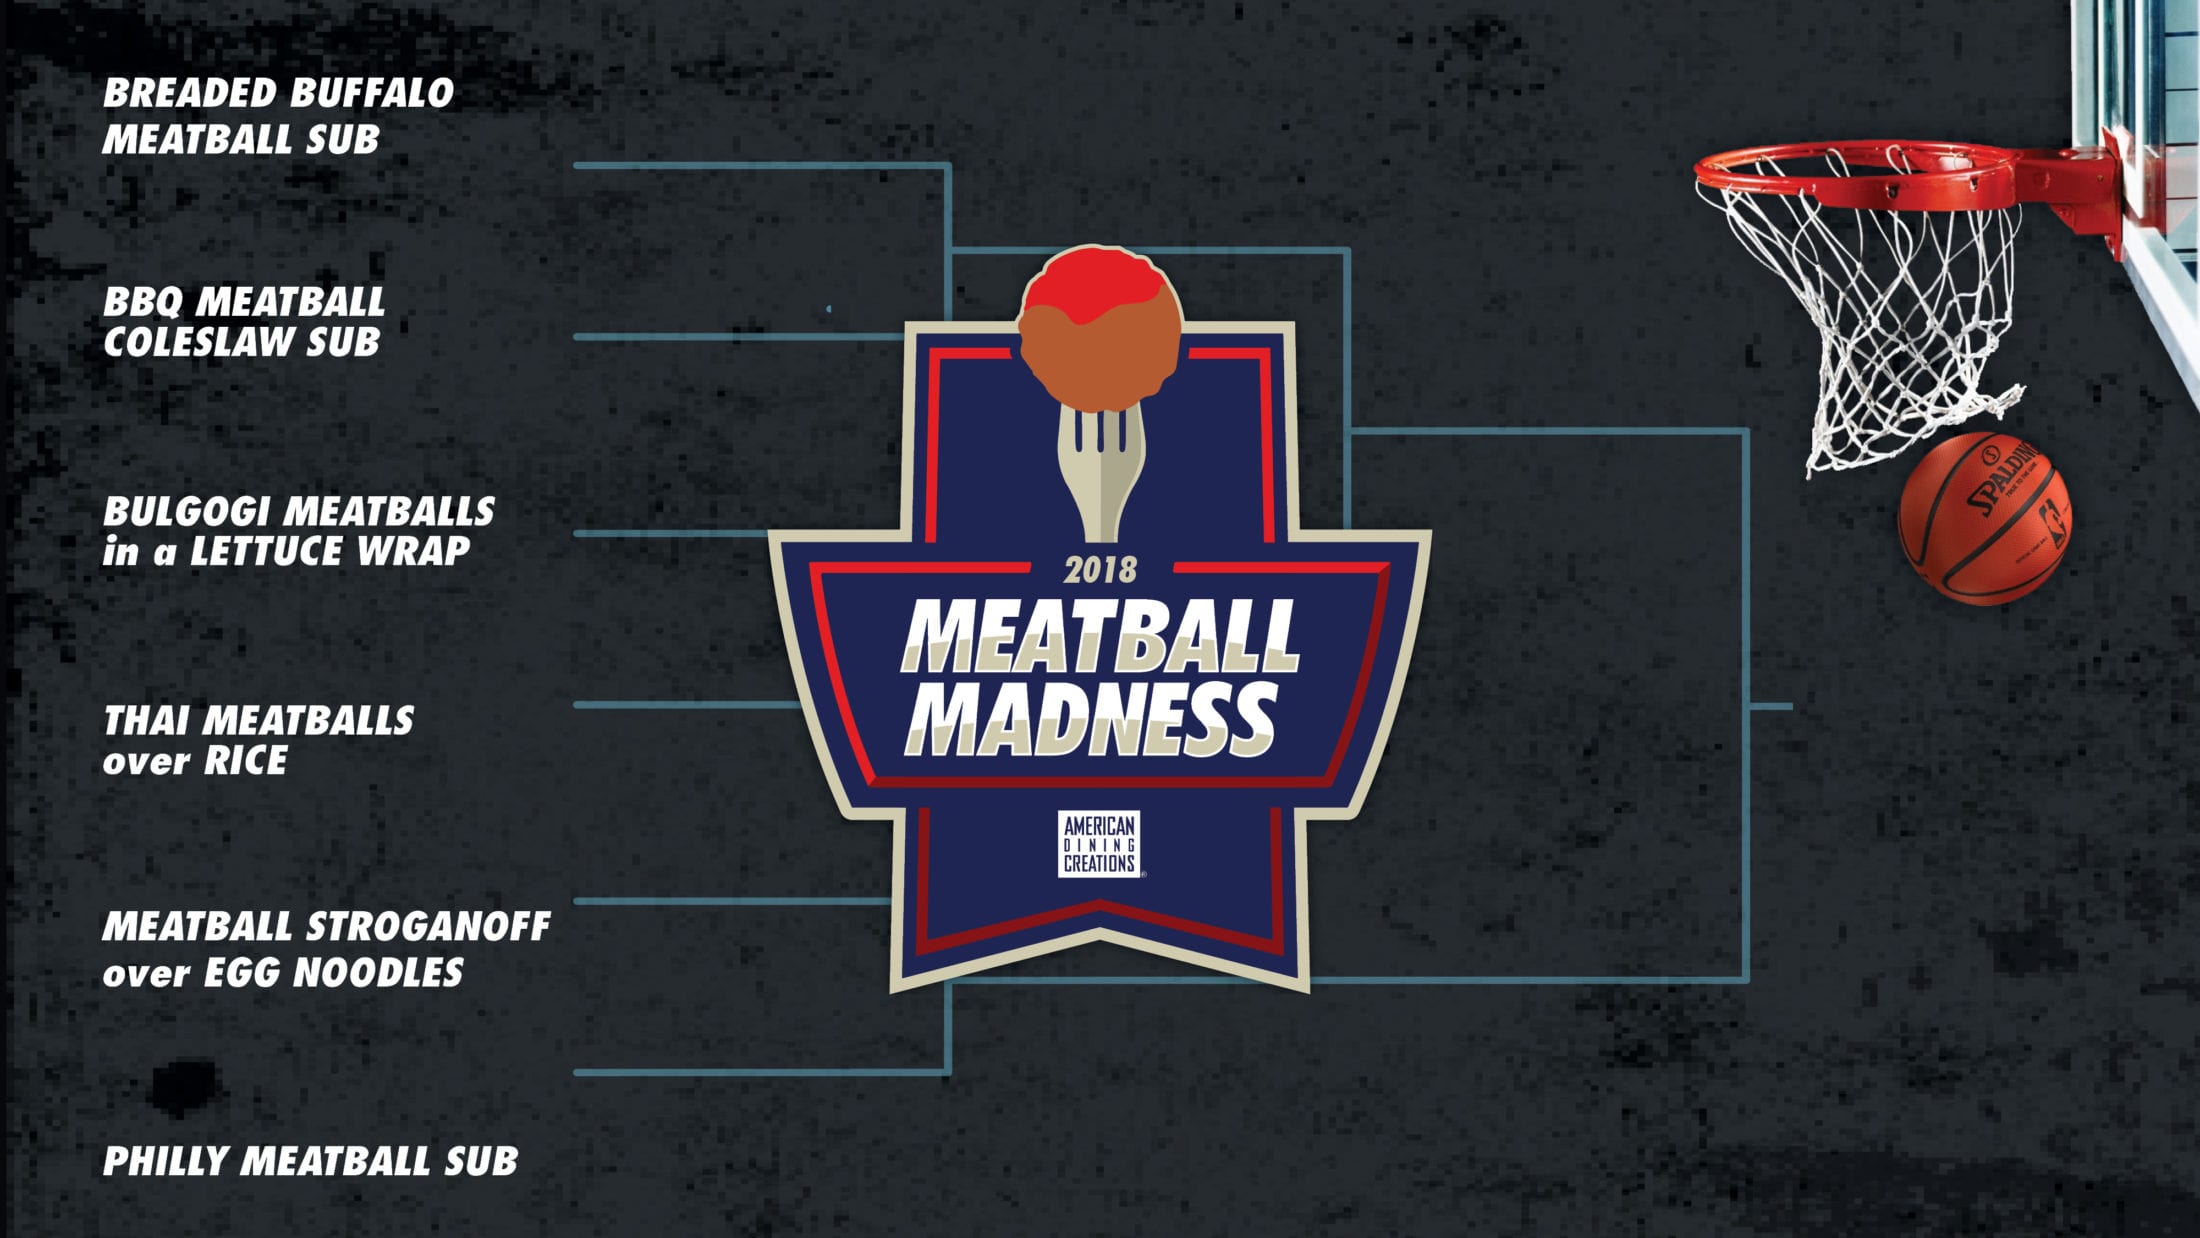 Breakfast Bowls, Super Foods and March Meatball Madness